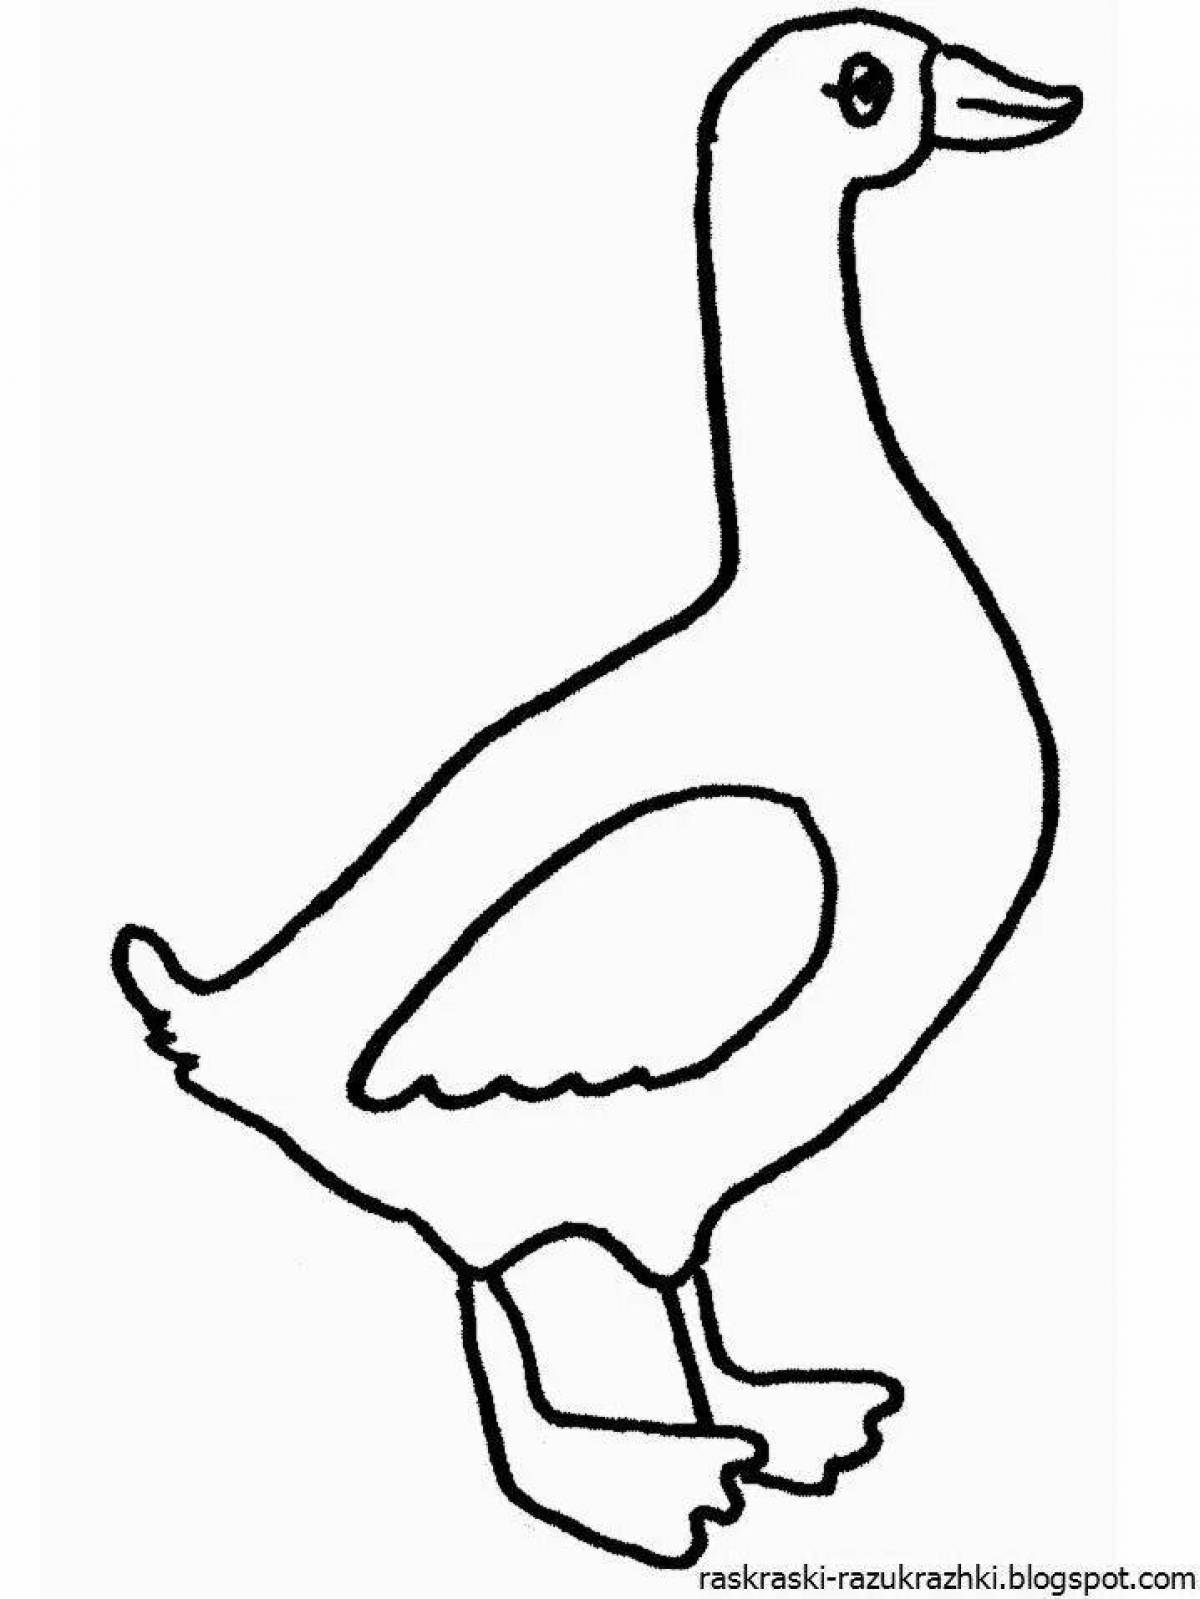 Coloring page of a goose with colorful splashes for kids